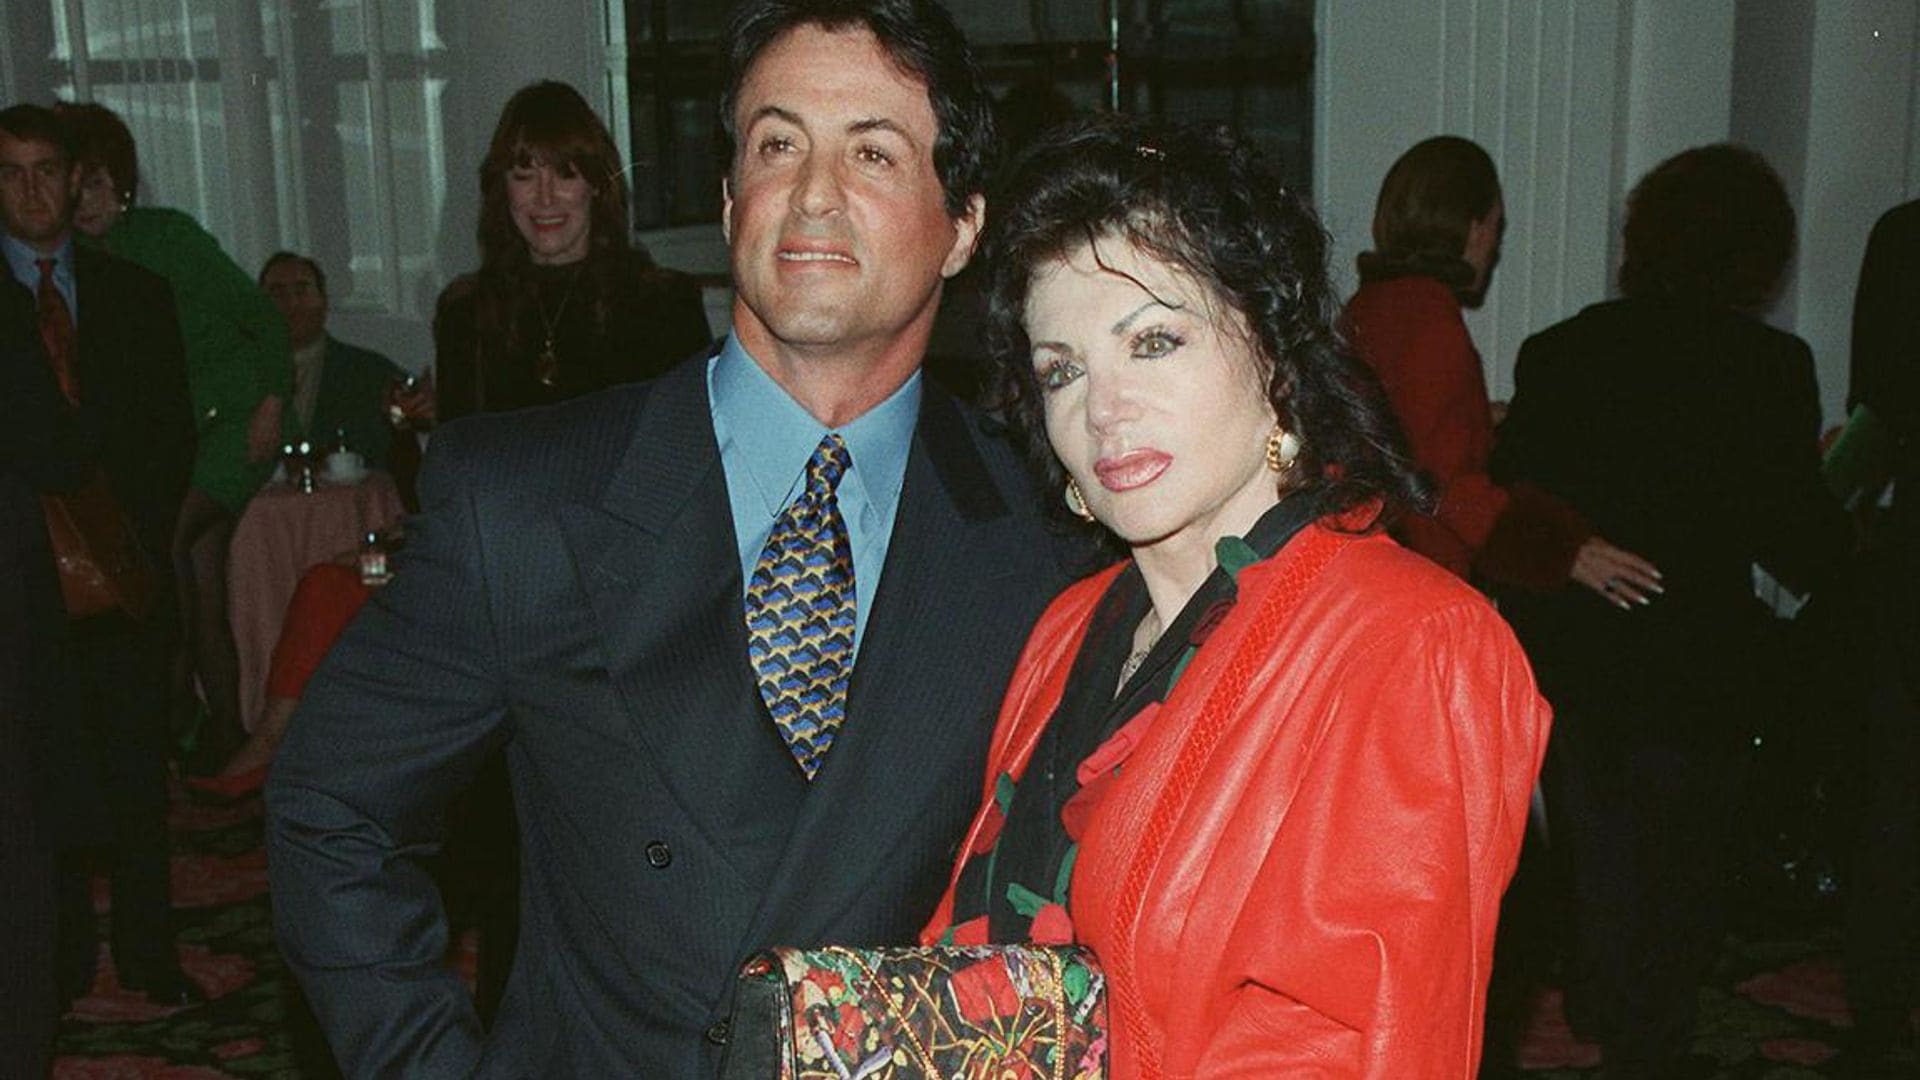 Jackie Stallone, mother of Sylvester Stallone has died at 98